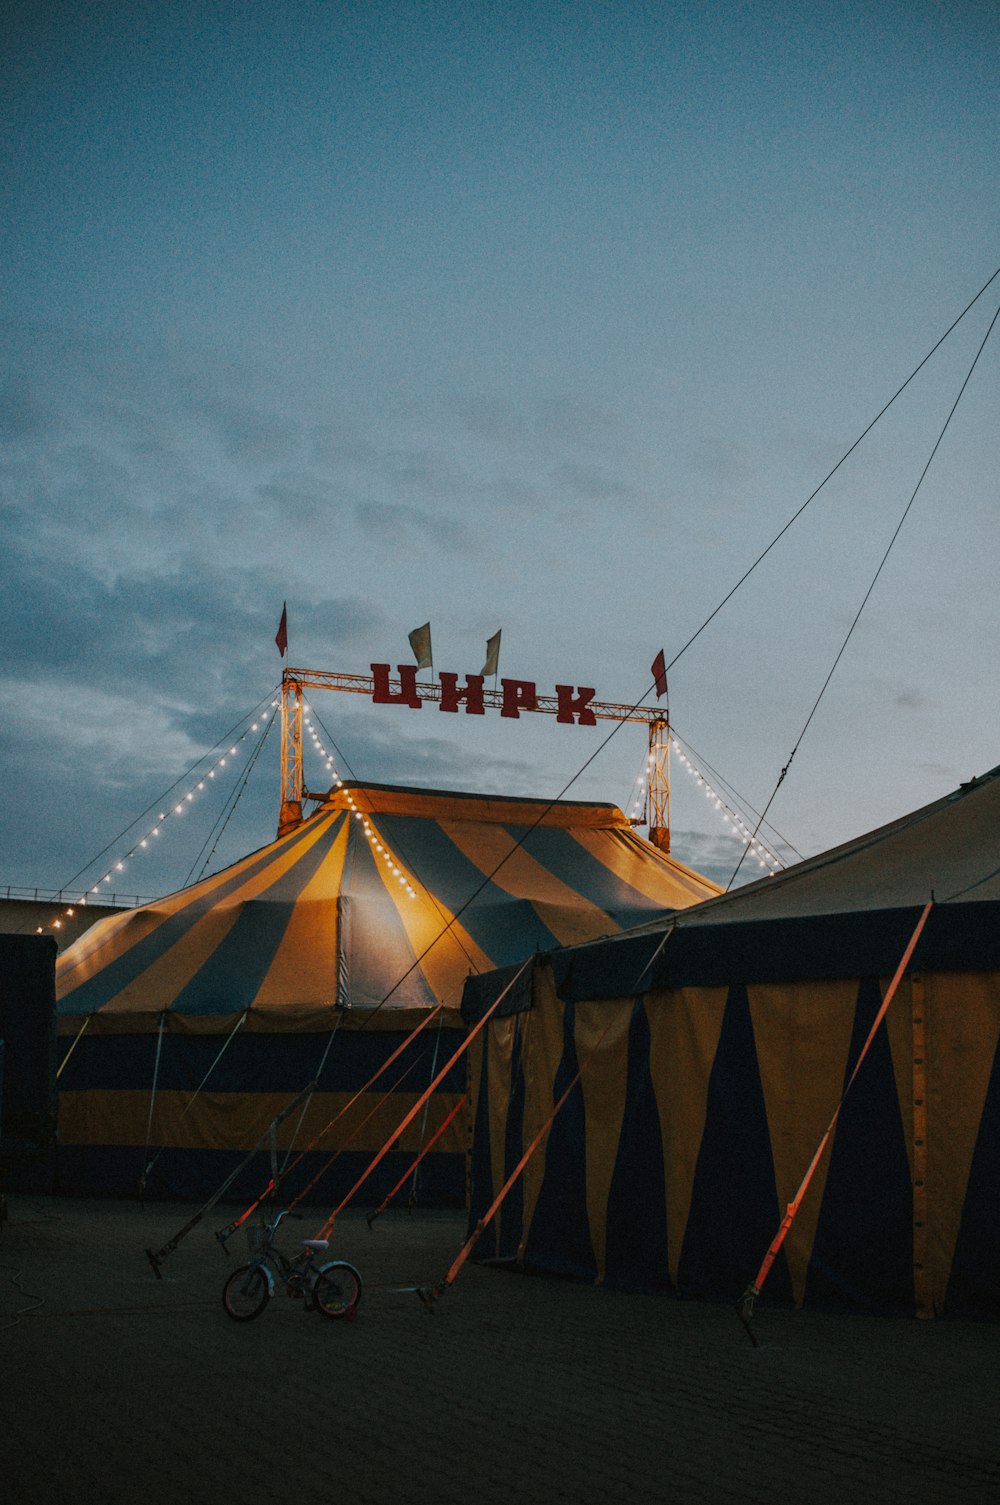 a circus tent with a bicycle parked in front of it